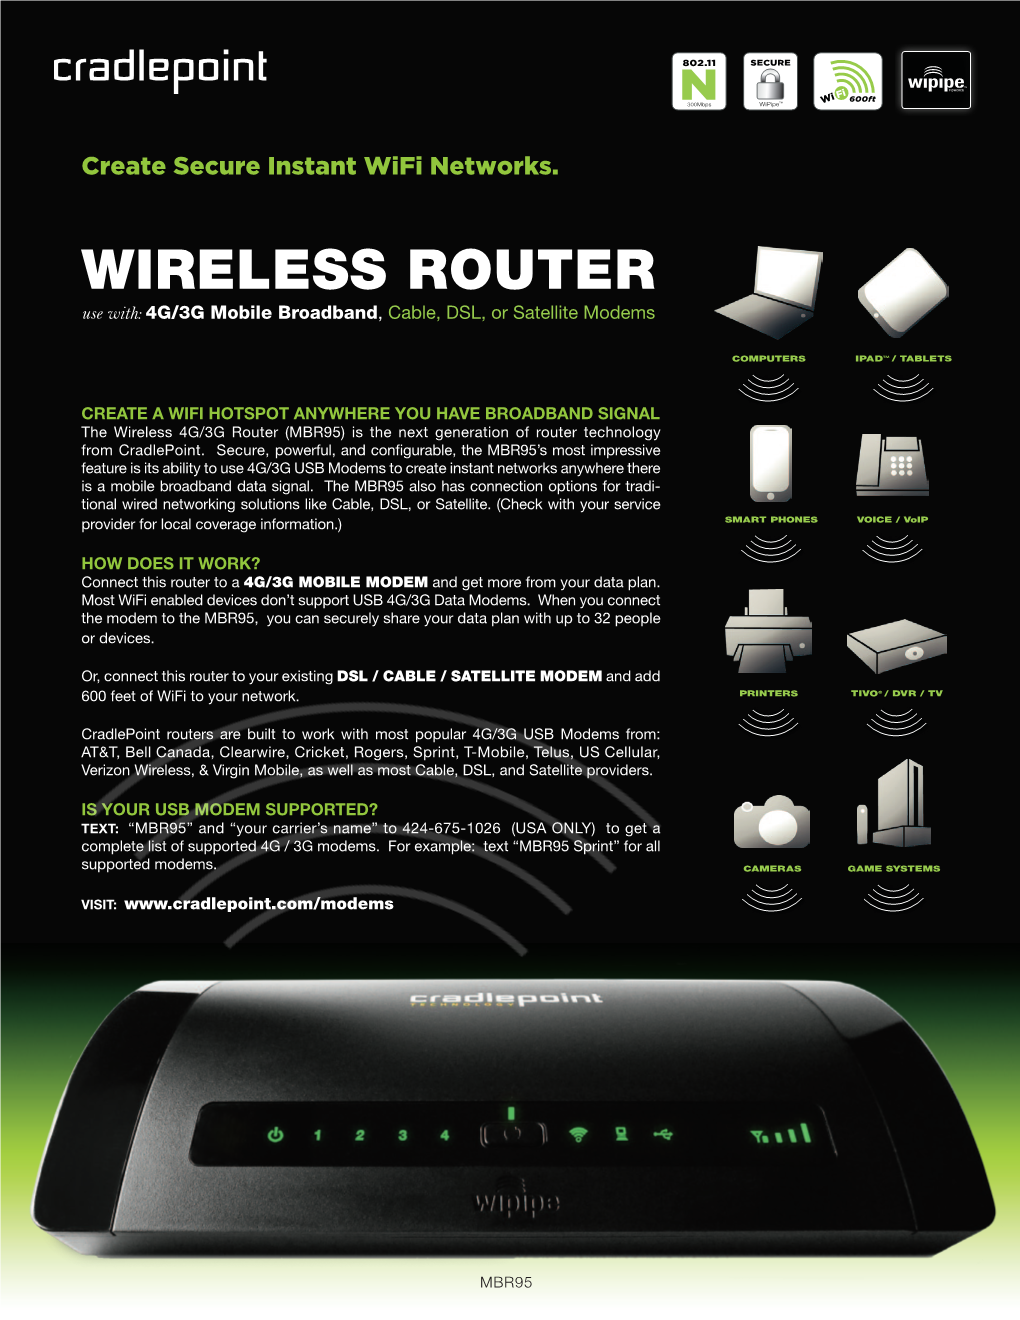 WIRELESS ROUTER Use With: 4G/3G Mobile Broadband, Cable, DSL, Or Satellite Modems